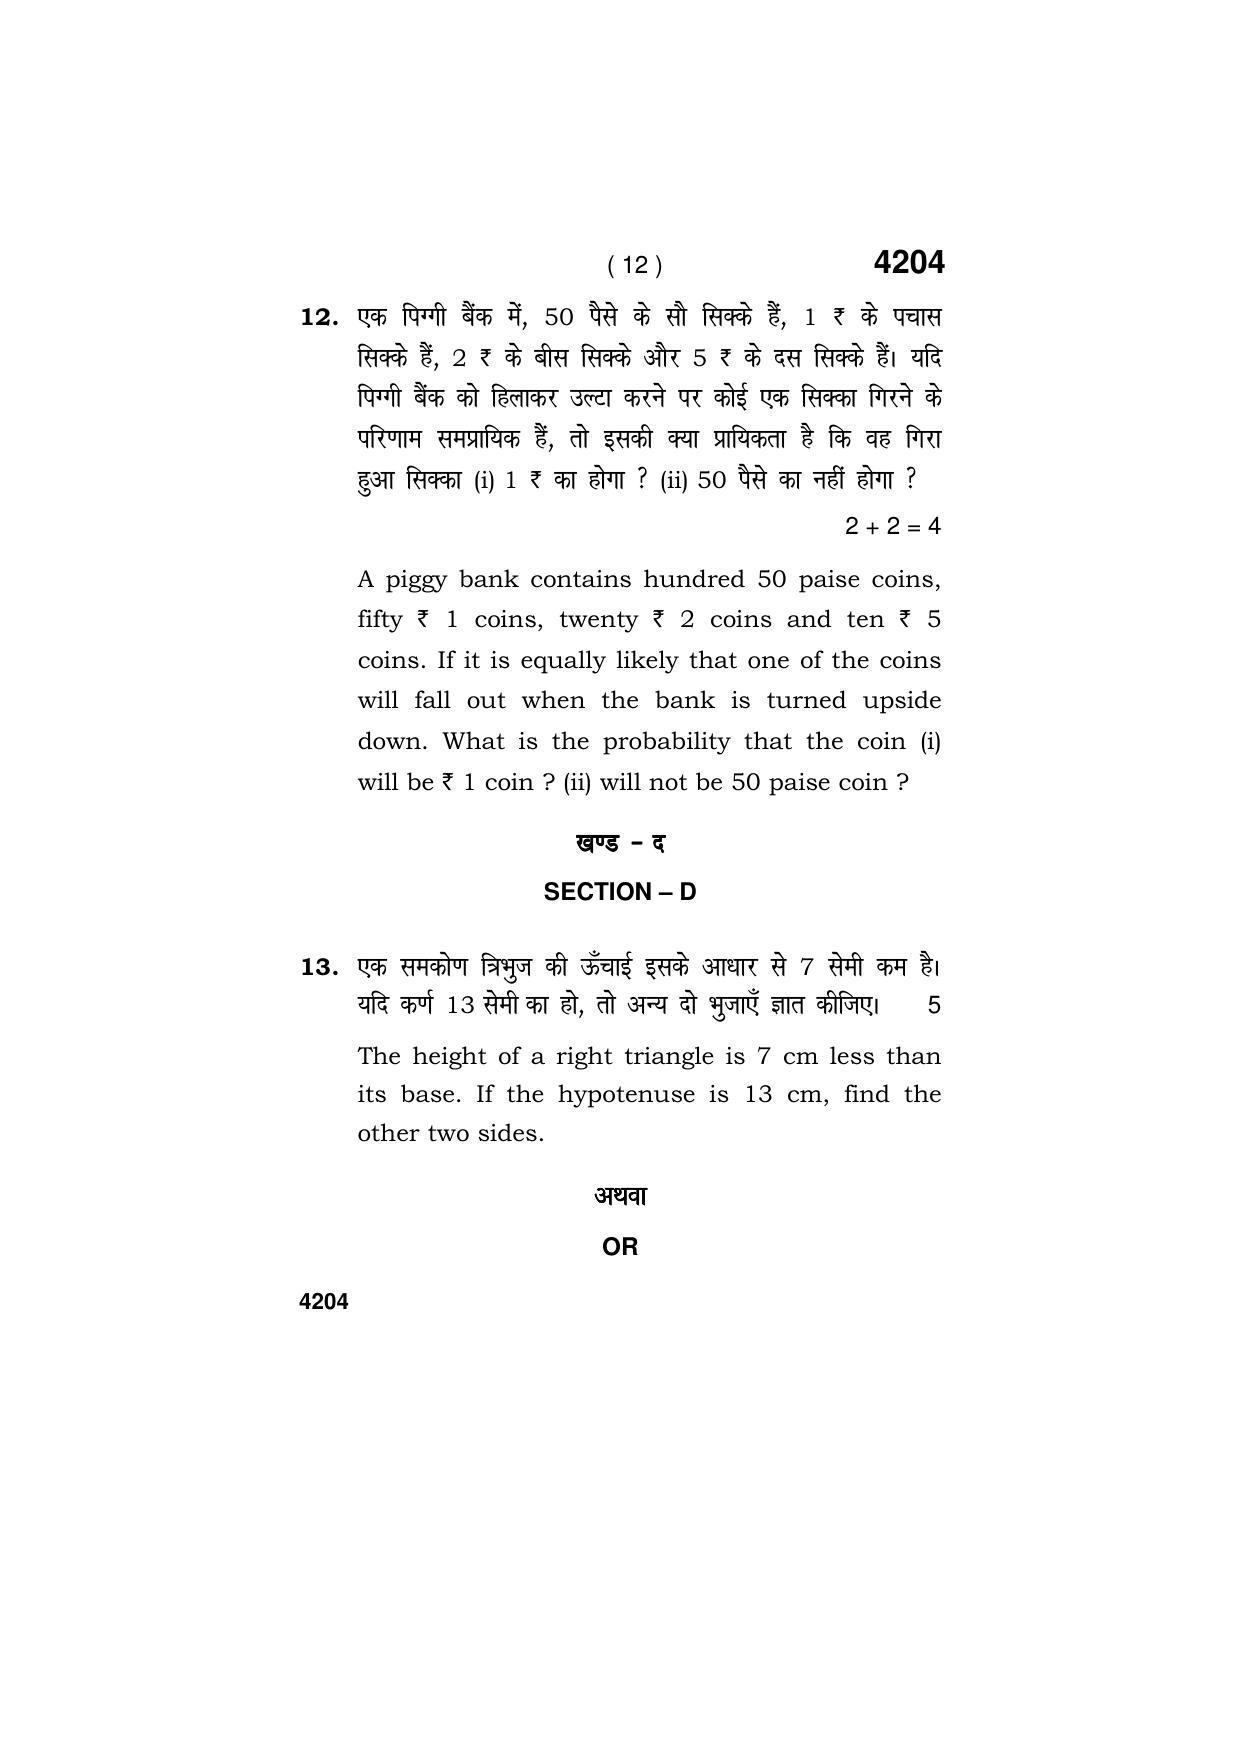 Haryana Board HBSE Class 10 Mathematics (Blind c) 2019 Question Paper - Page 12